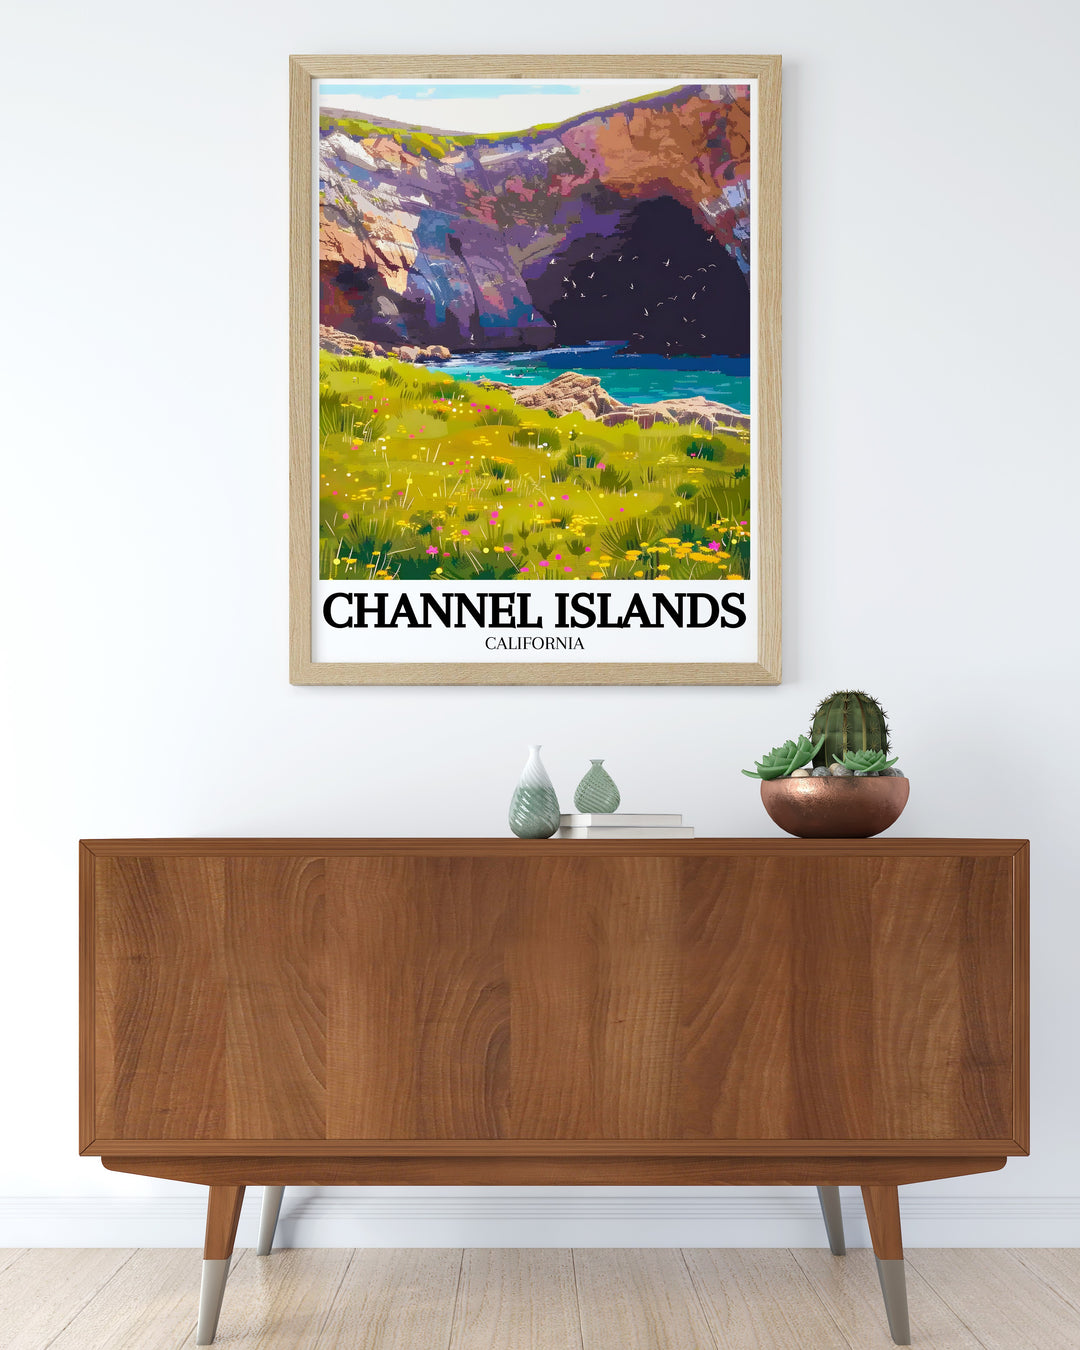 Santa Rosa Island, Torrey Pines groves print capturing the picturesque scenery and unique flora of Channel Islands National Park perfect for anyone who loves nature and outdoor adventure.